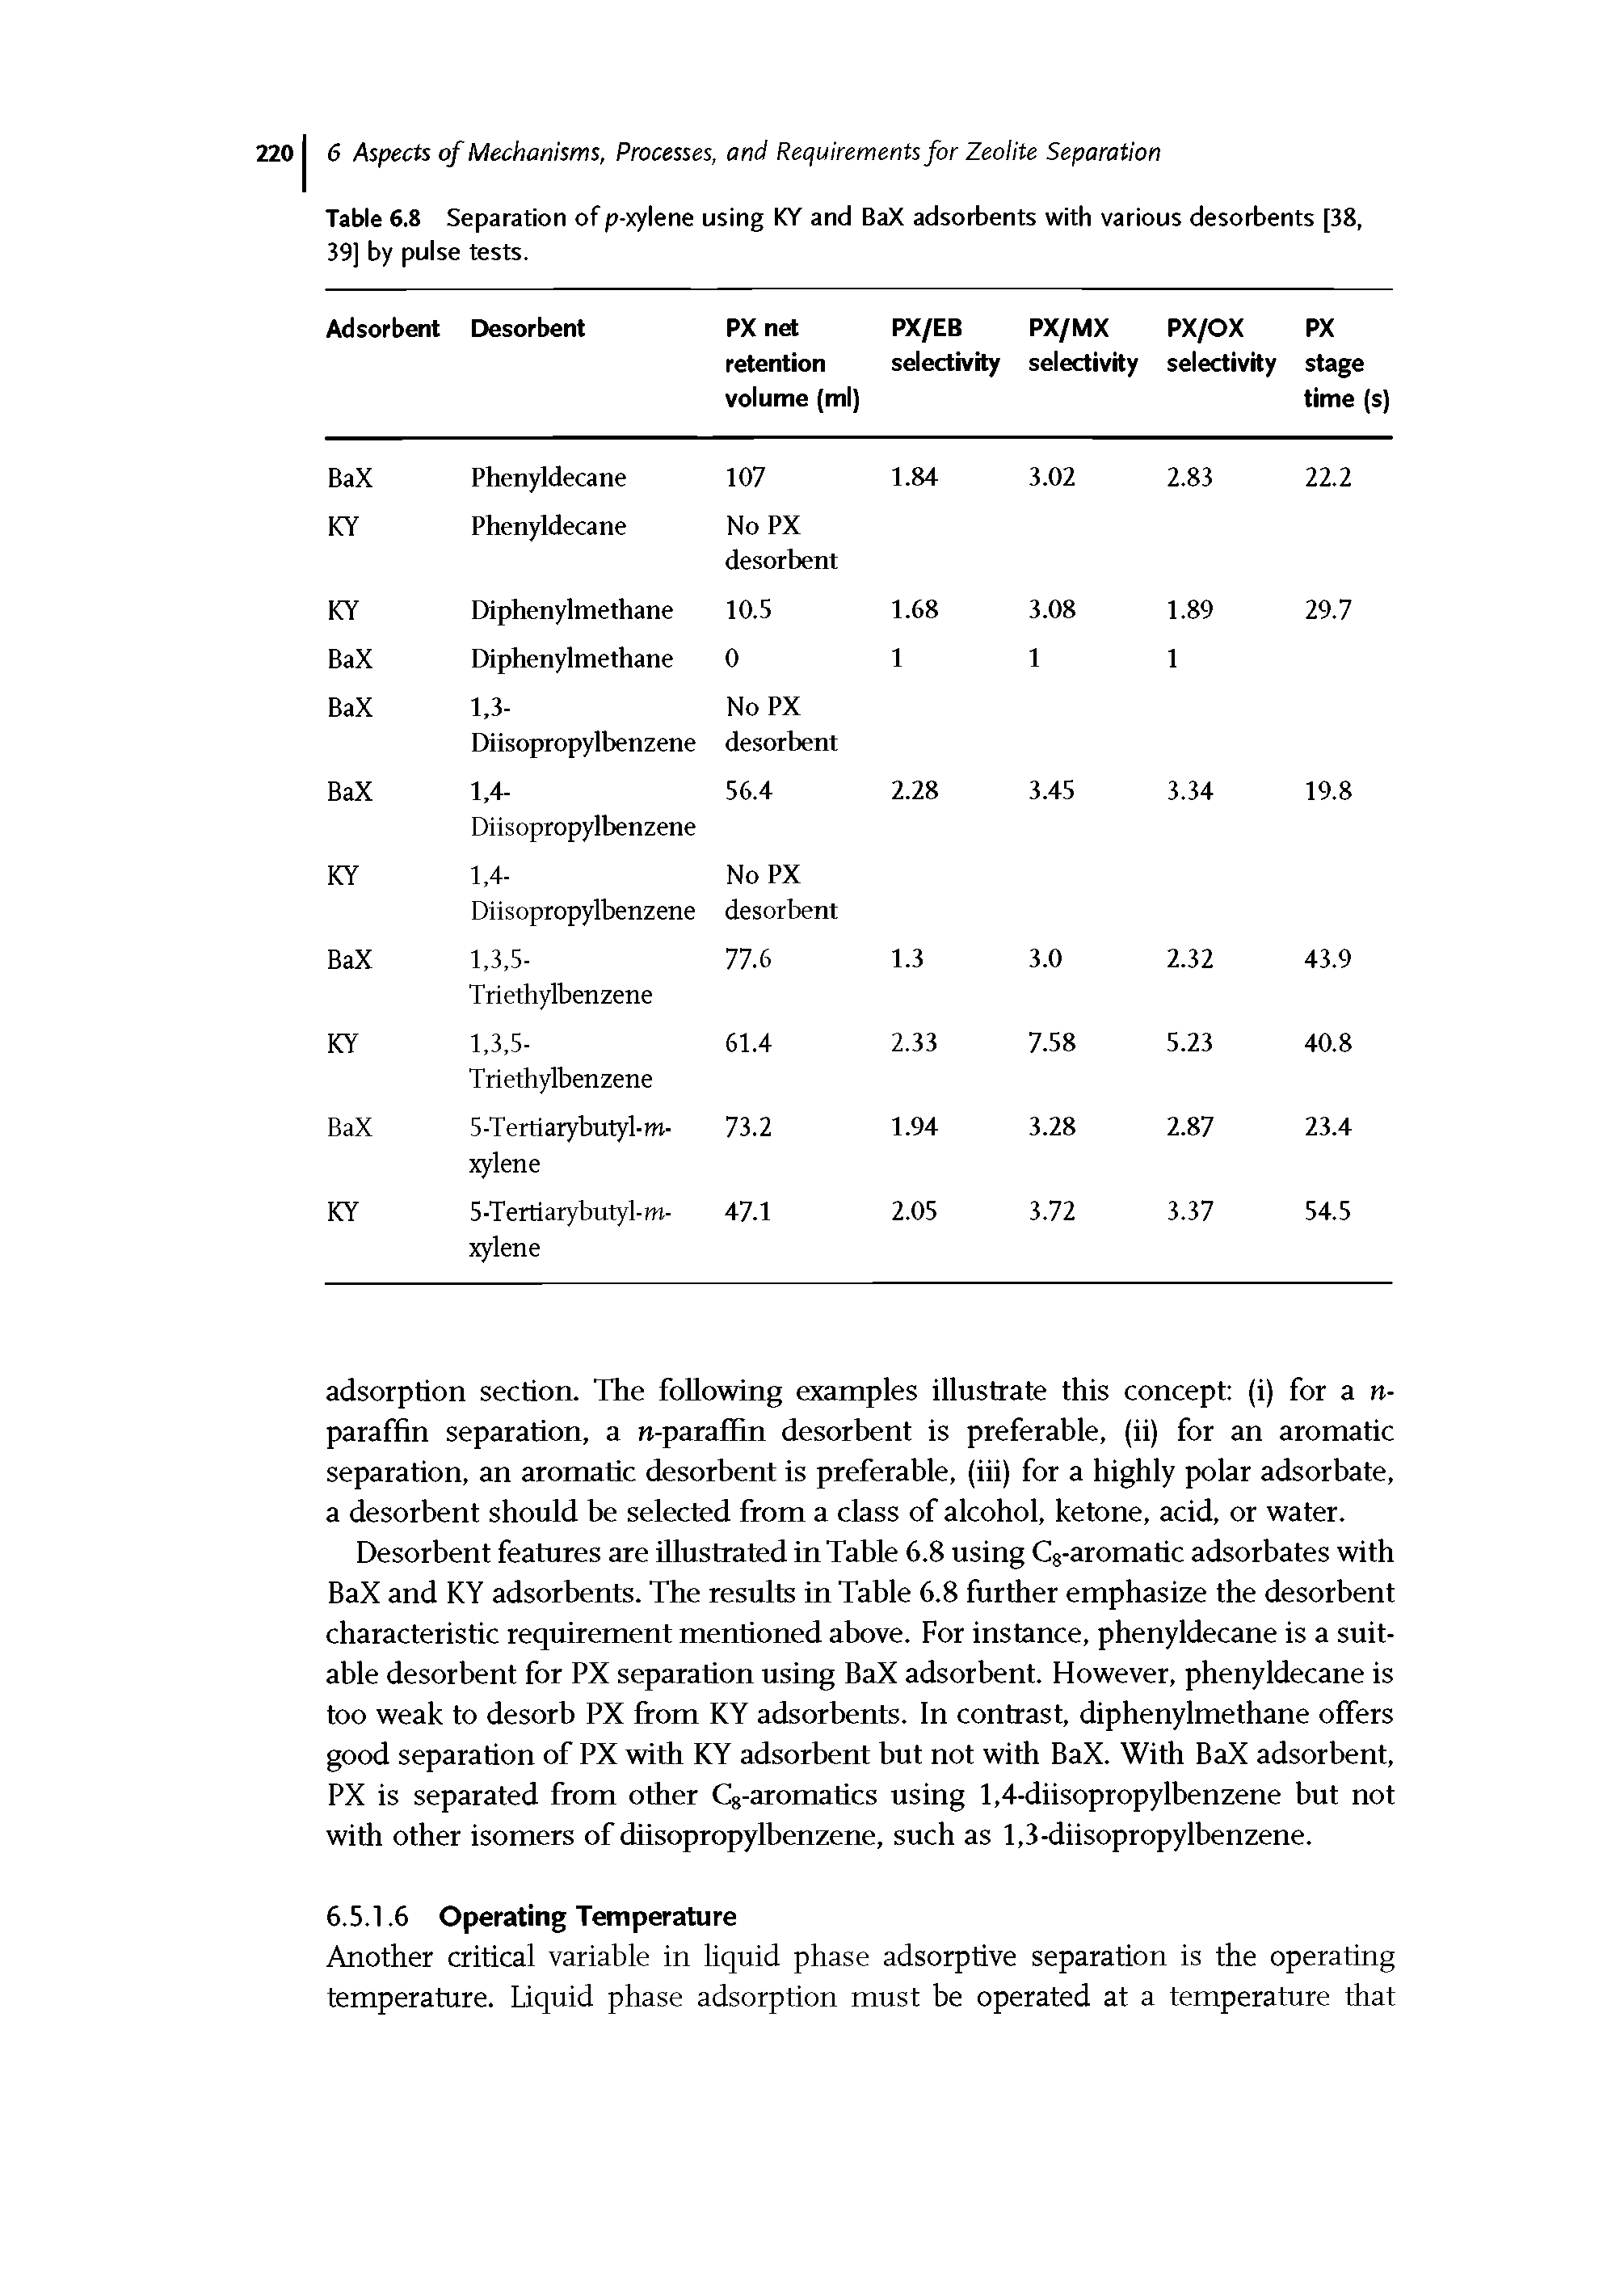 Table 6.8 Separation of p-xylene using KY and BaX adsorbents with various desorbents [38, 39] by pulse tests.